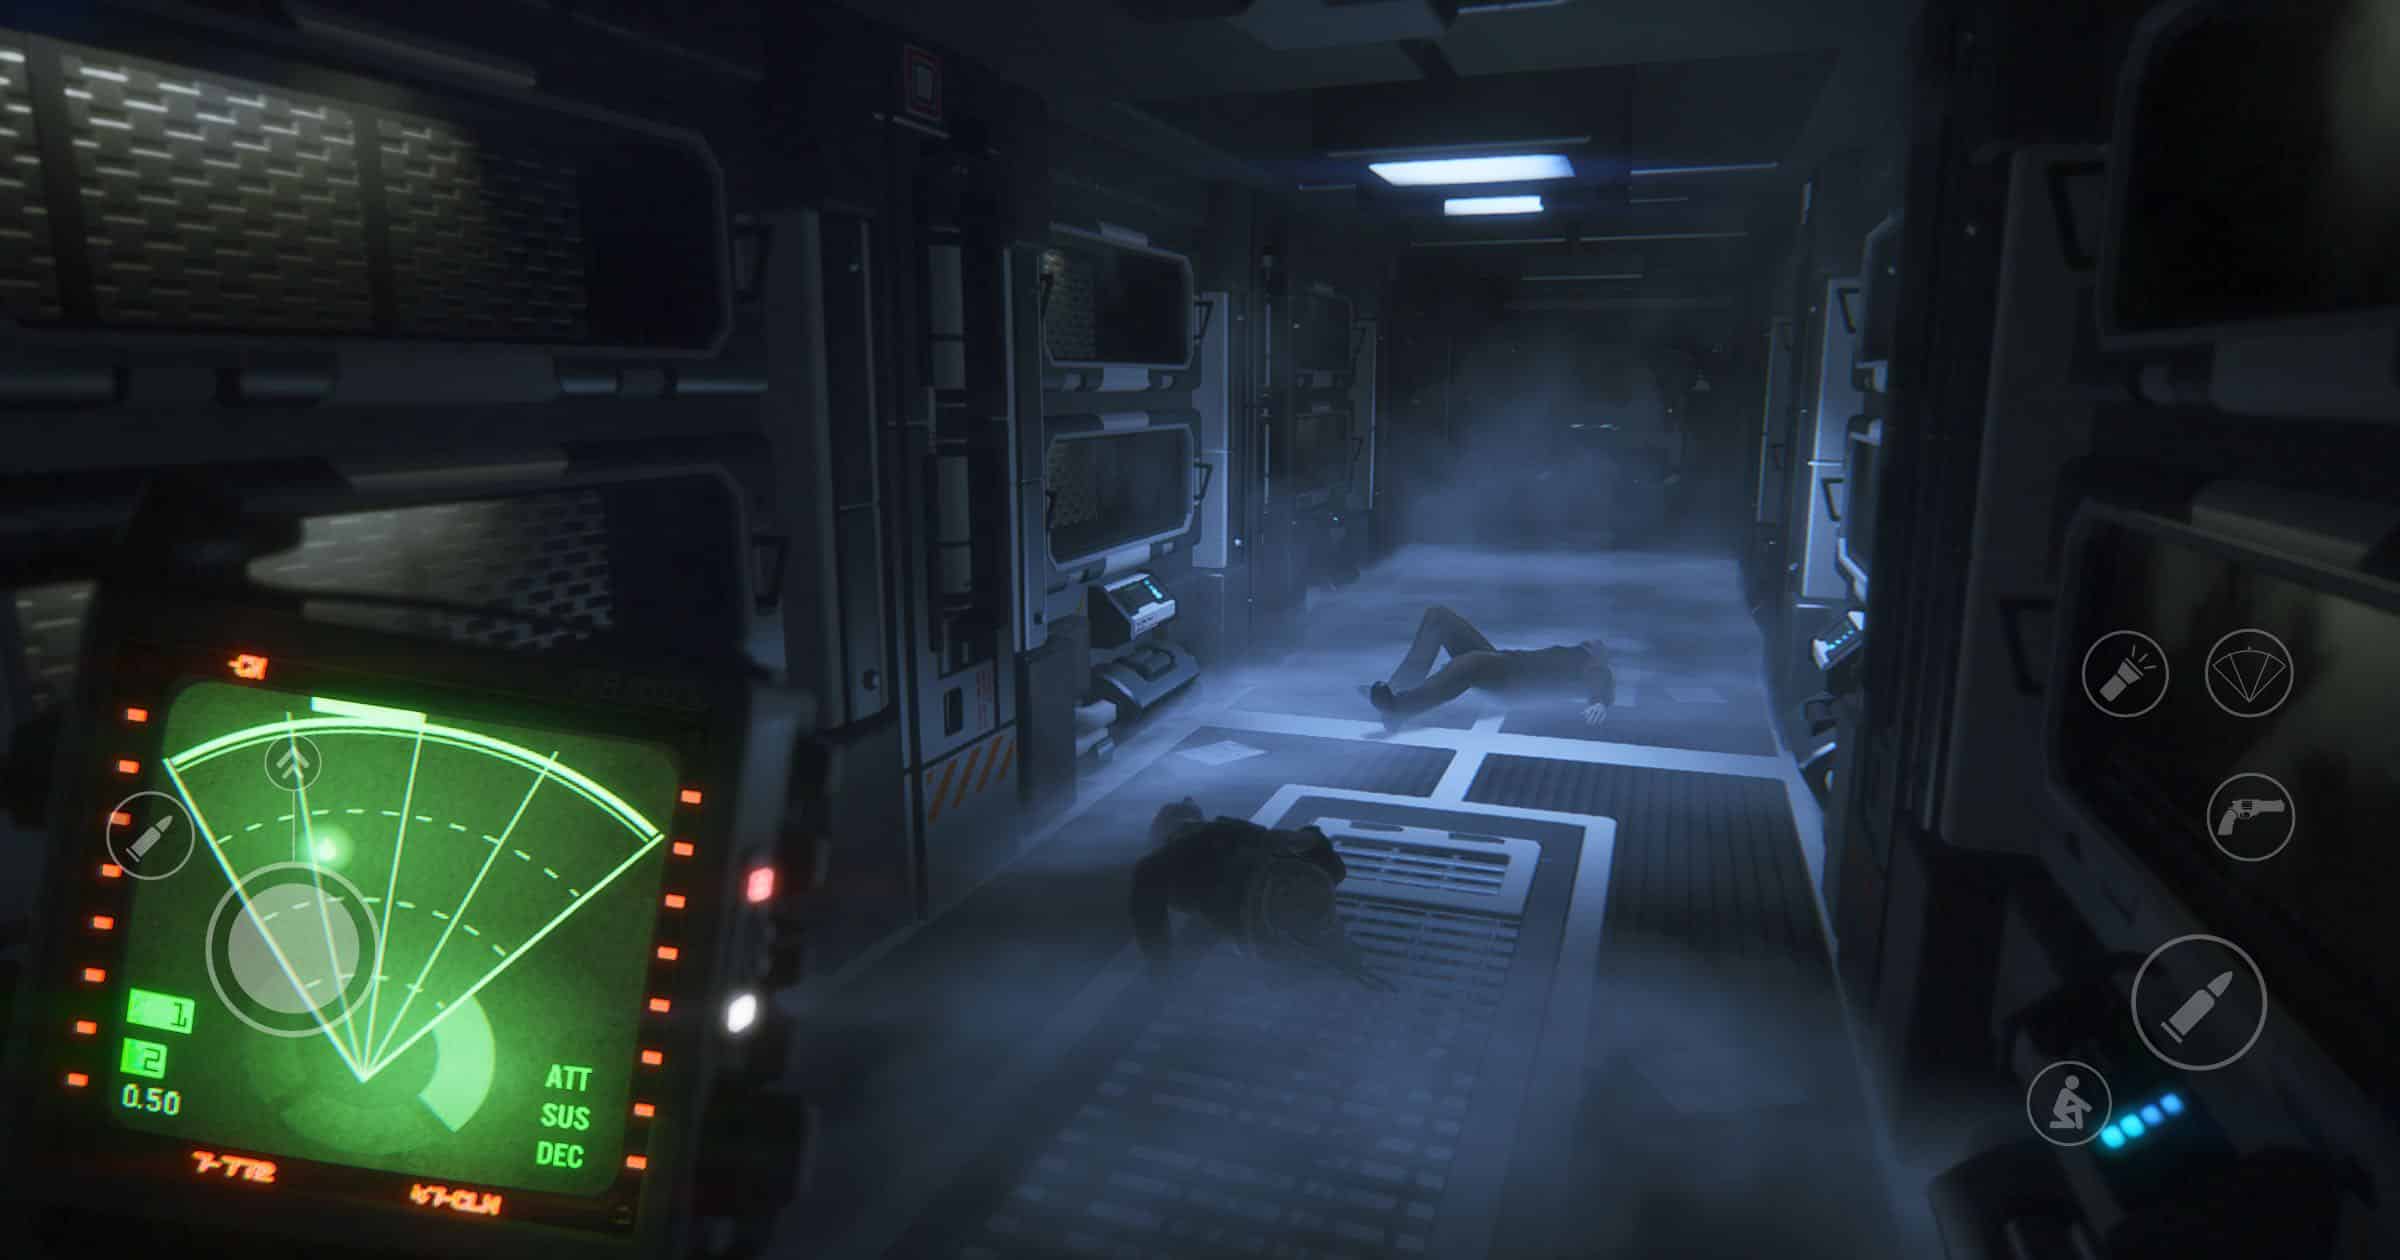 Survival Horror Game ‘Alien: Isolation’ is Now Available for iPhone